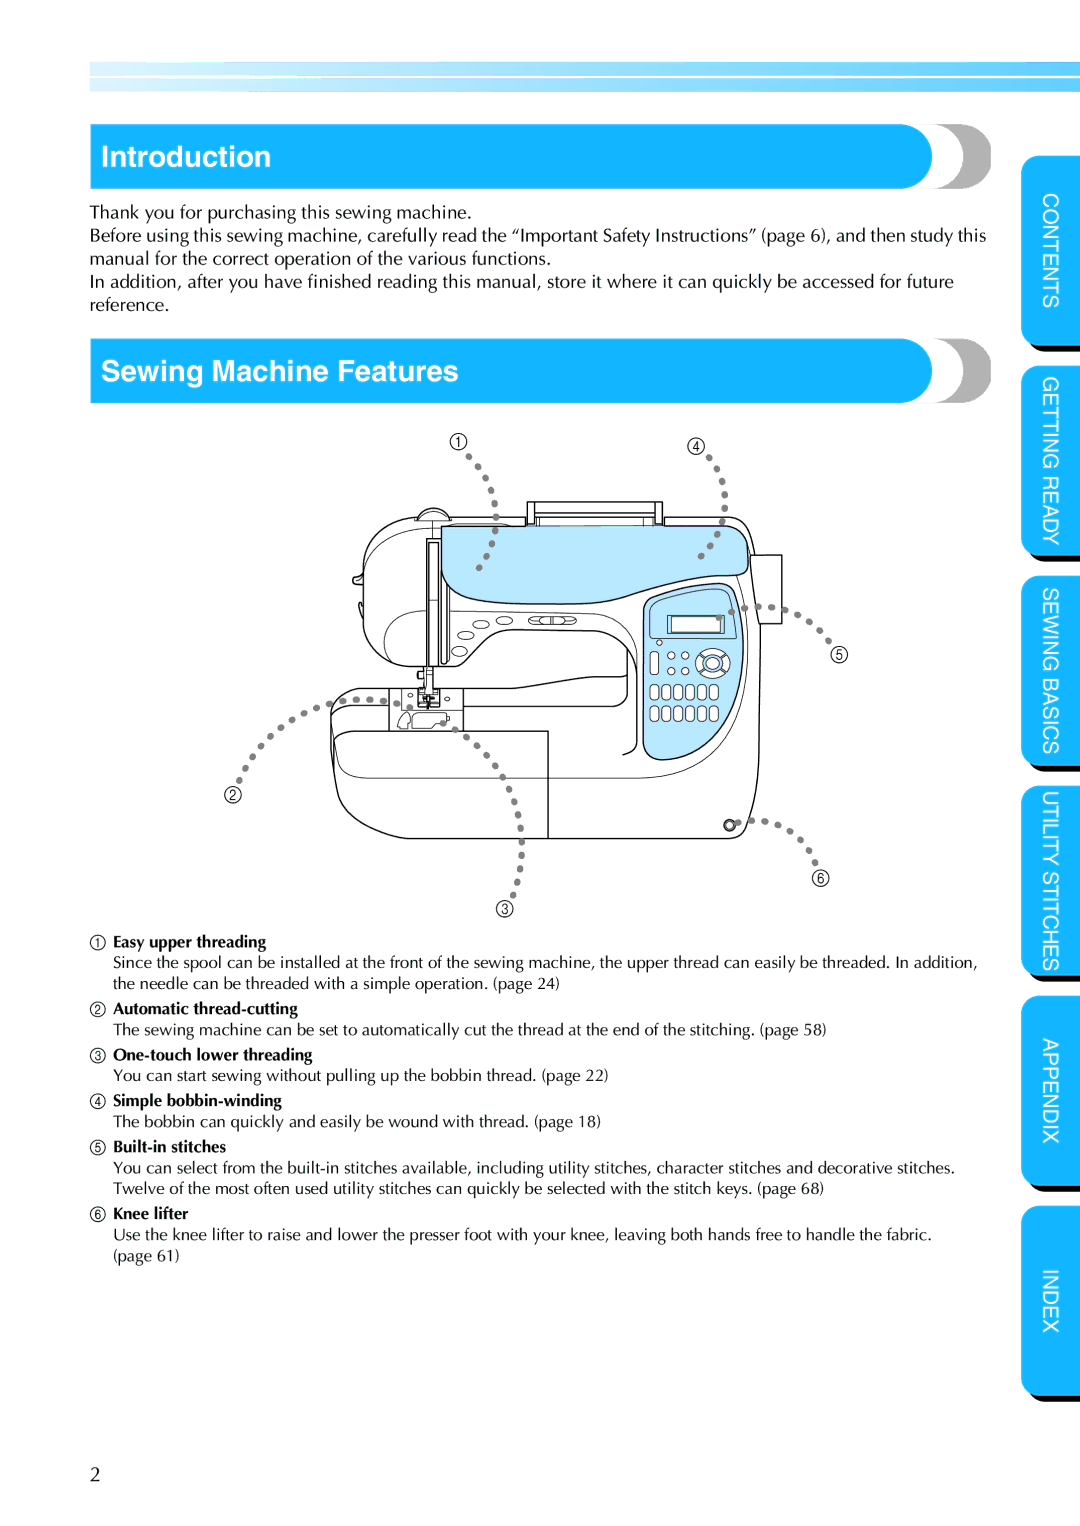 Brother NX 400 manual Introduction, Sewing Machine Features 